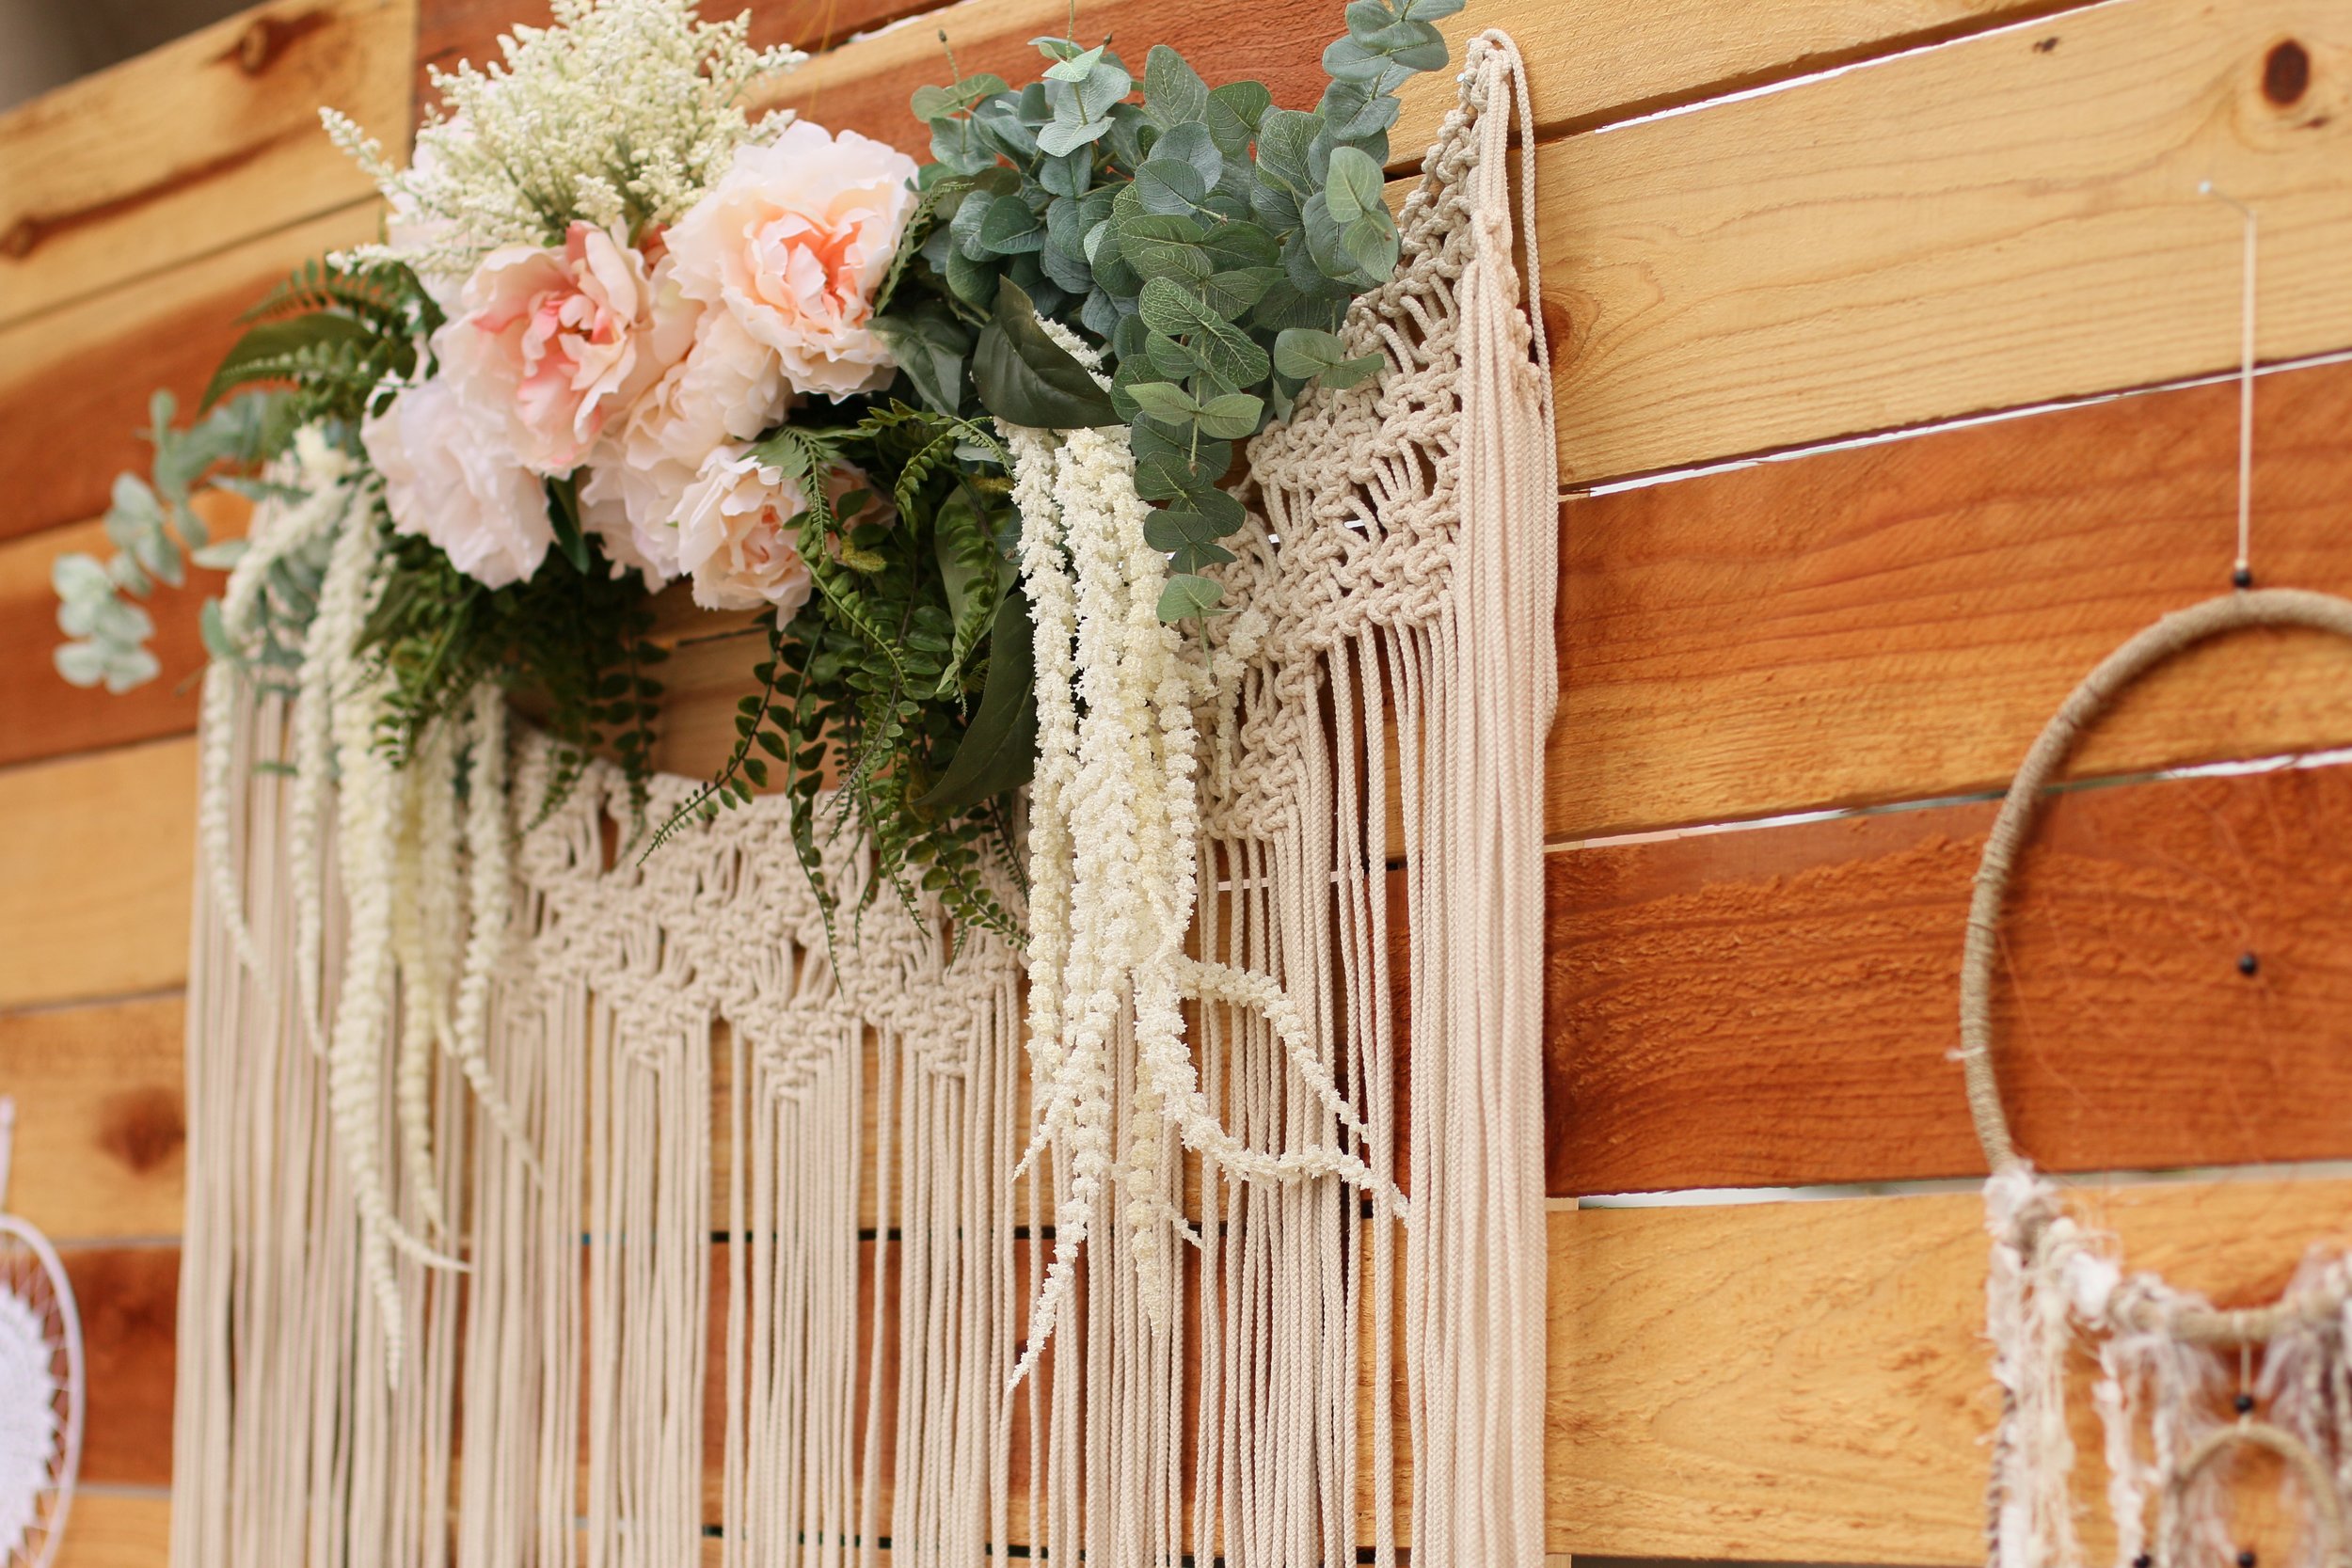 Copy of A gorgeous pre-curated rental collection with succulents, pops of blush, dreamcatchers, and rustic wood accents. Make it yours for your next baby or bridal shower! @inJOYtheParty